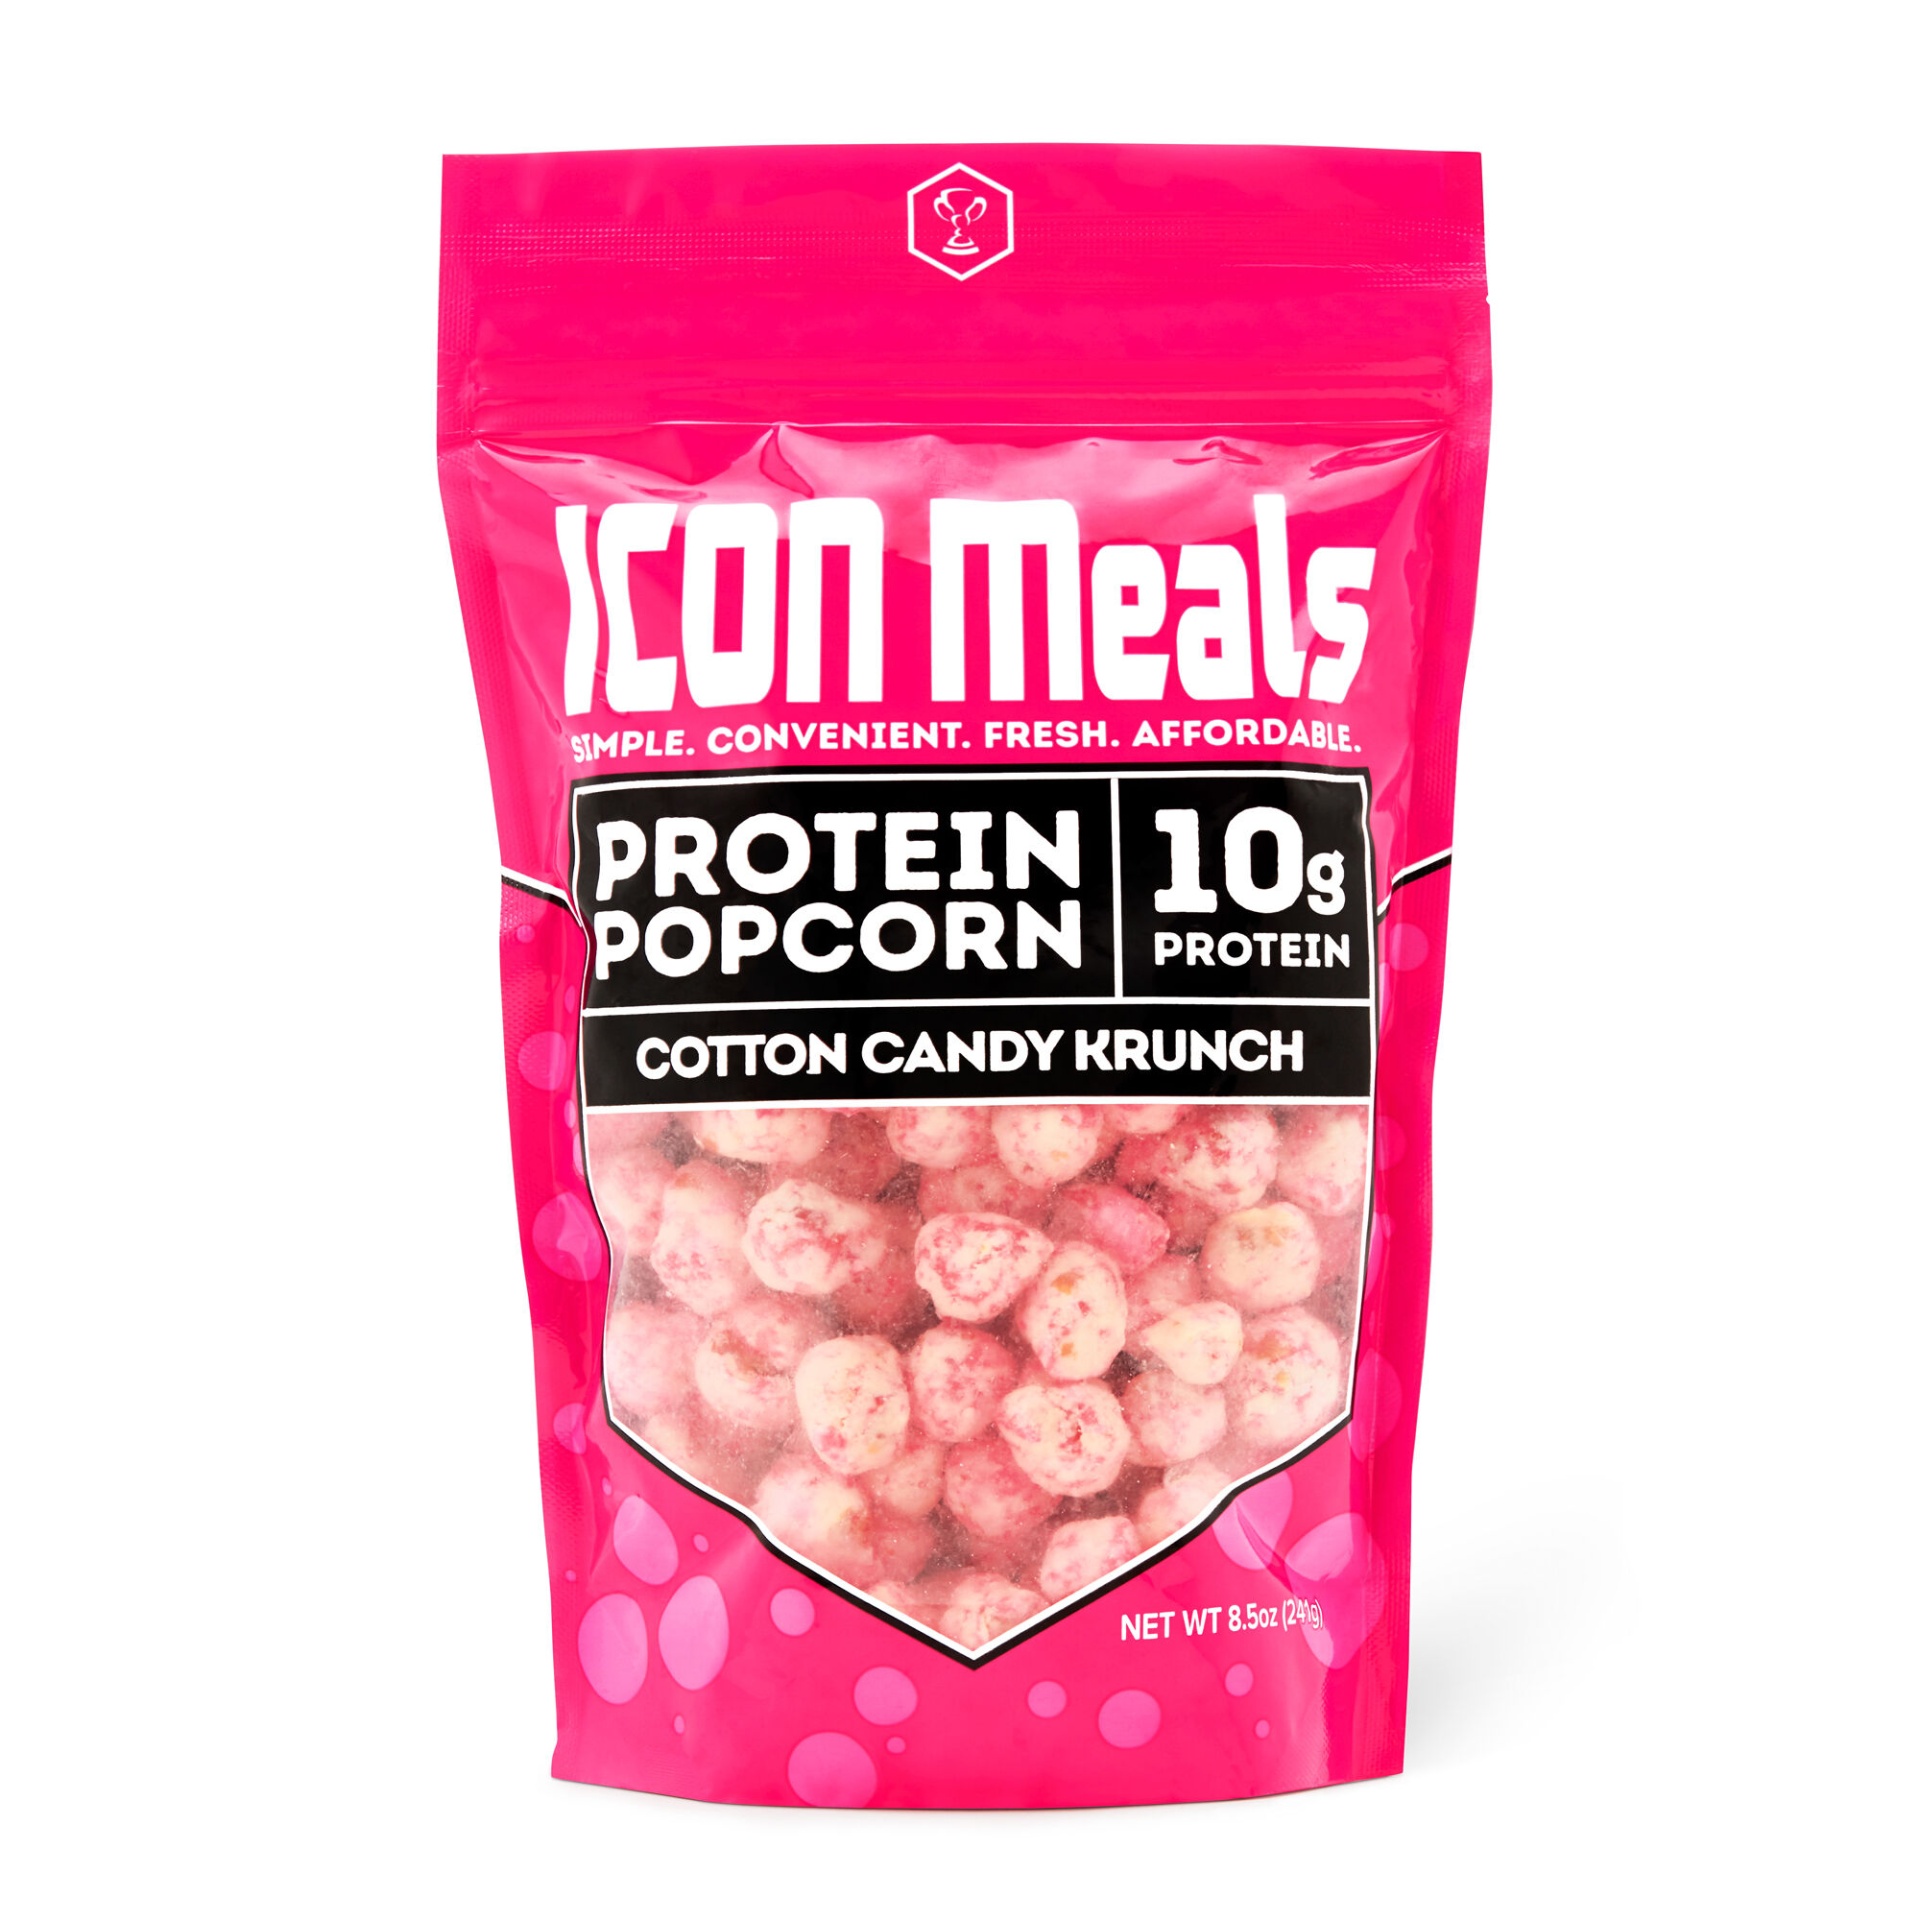 slide 1 of 1, ICON Meals Protein Popcorn - Cotton Candy Krunch, 8.5 oz